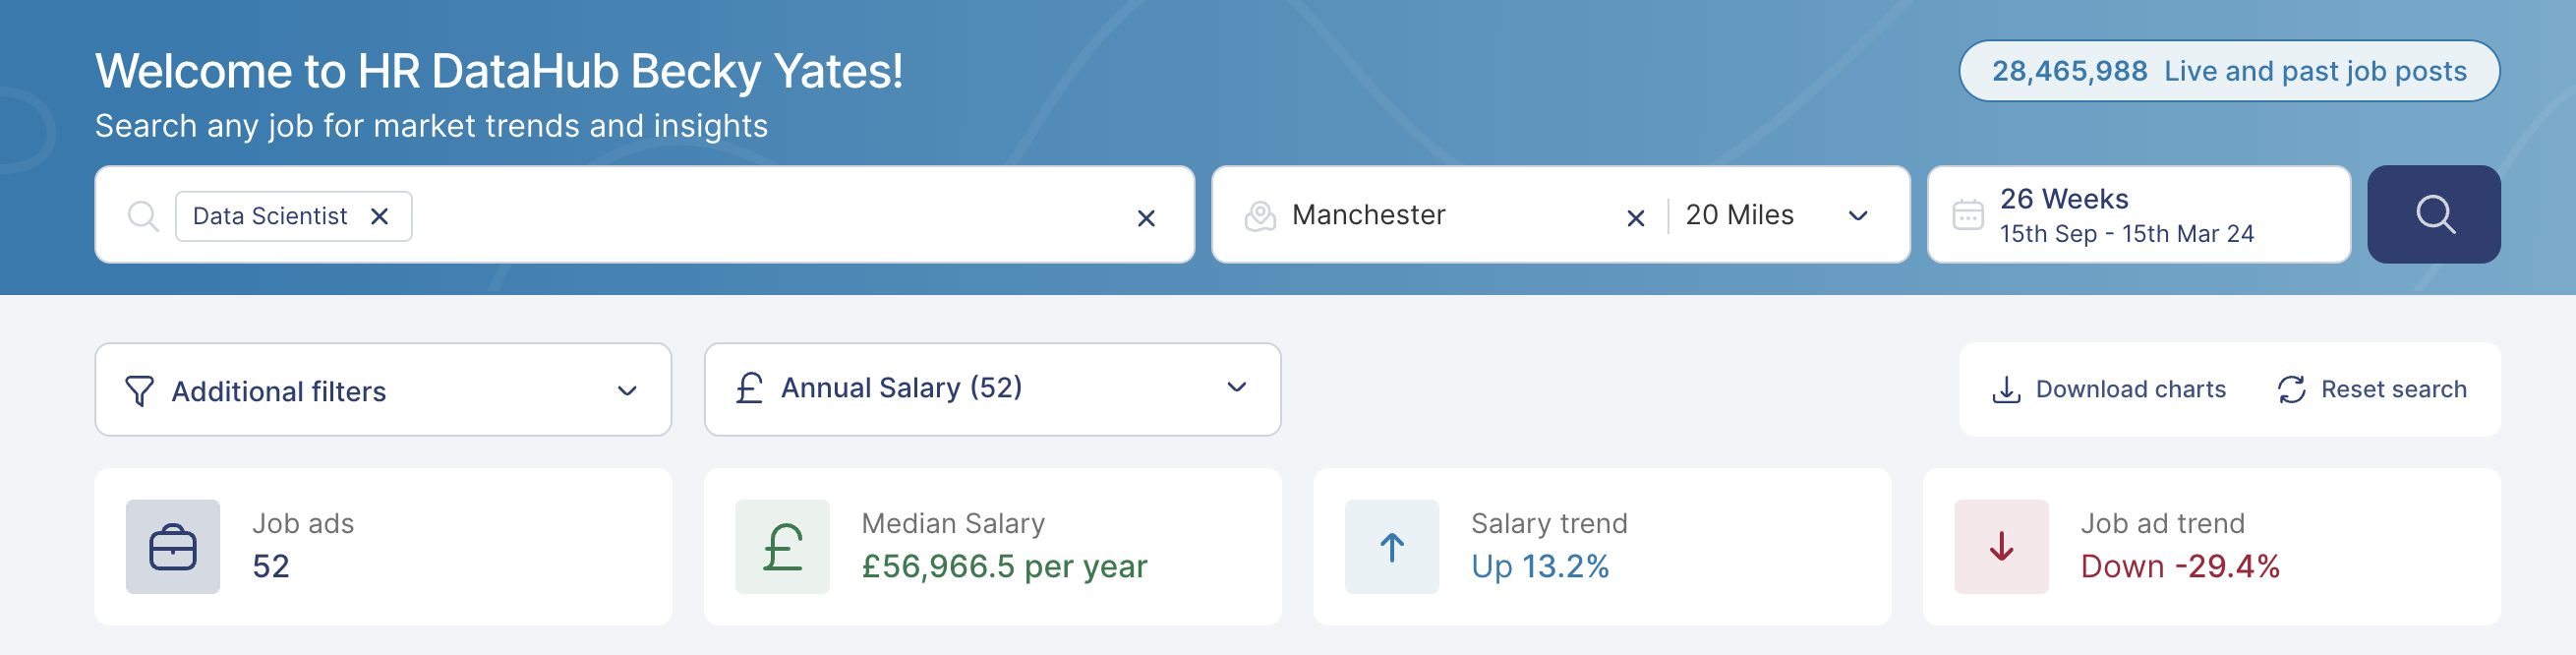 Get the salary insights you need to keep your finger on the pulse of the market in a snapshot. In just the click of a button you can discover the number of job ads for your role, median salary, the salary trend over time and job ad trends over time. 